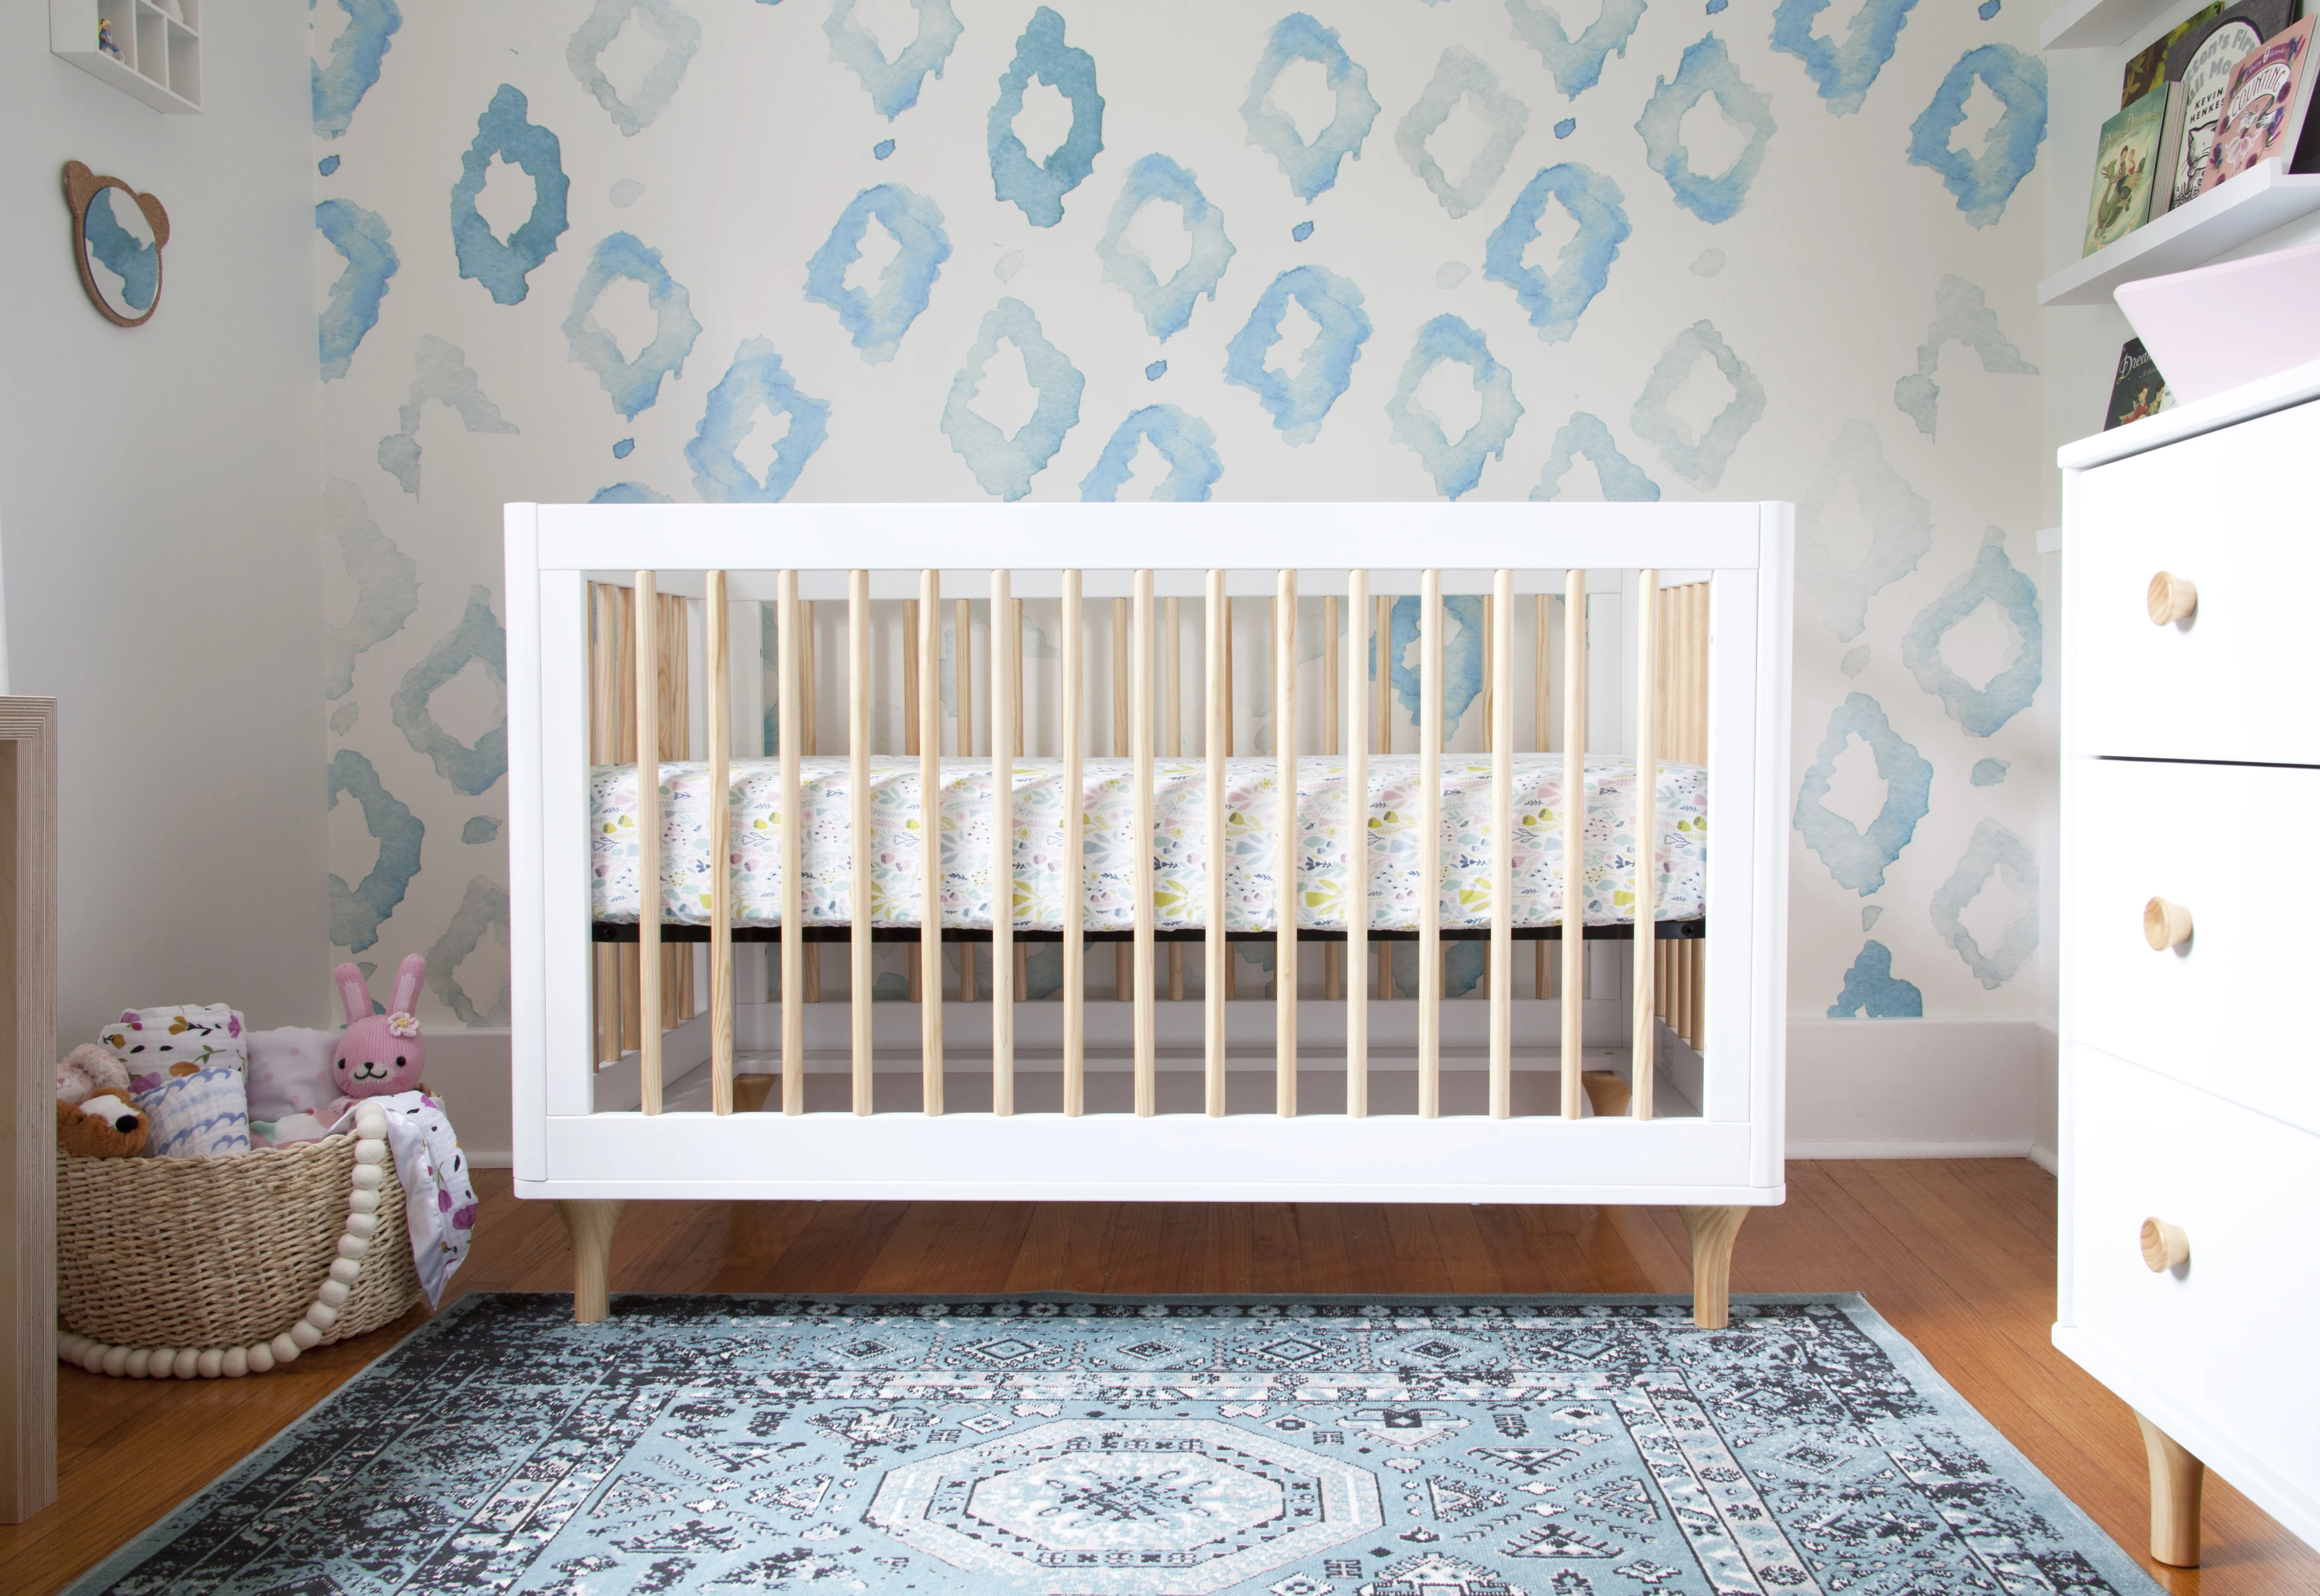 Babyletto Lolly Crib with Watercolor Wallpaper Accent Wall - Project Nursery